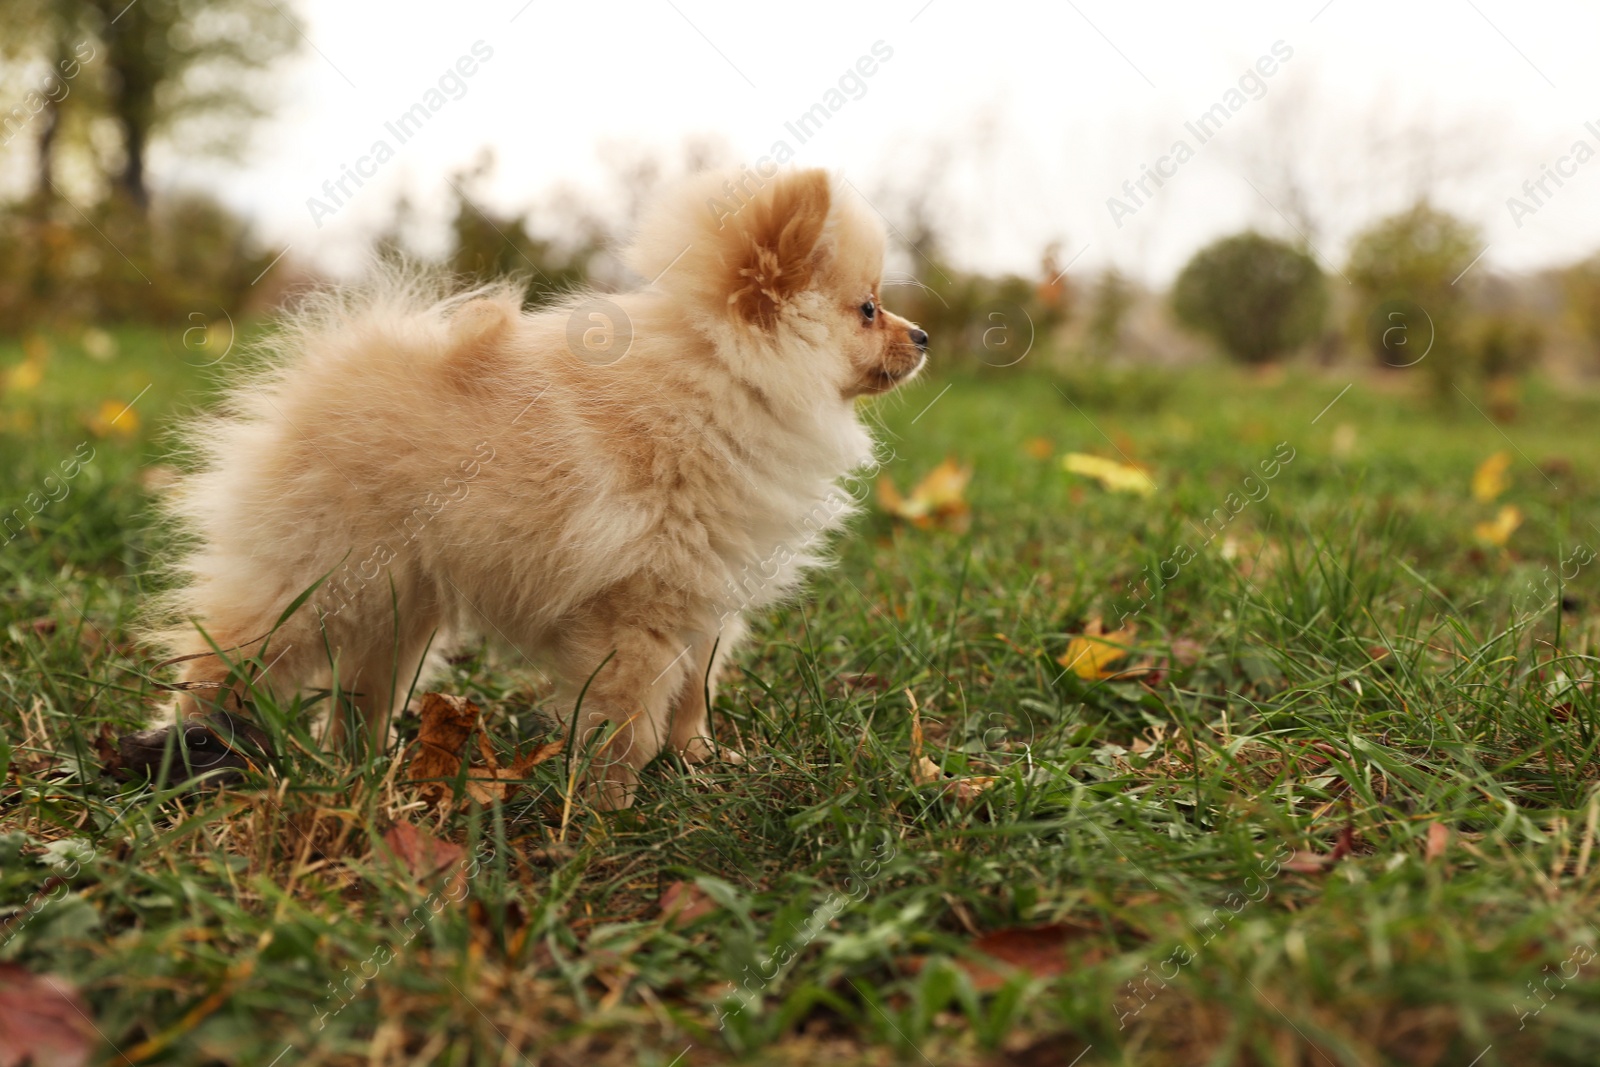 Photo of Cute fluffy dog in park on autumn day